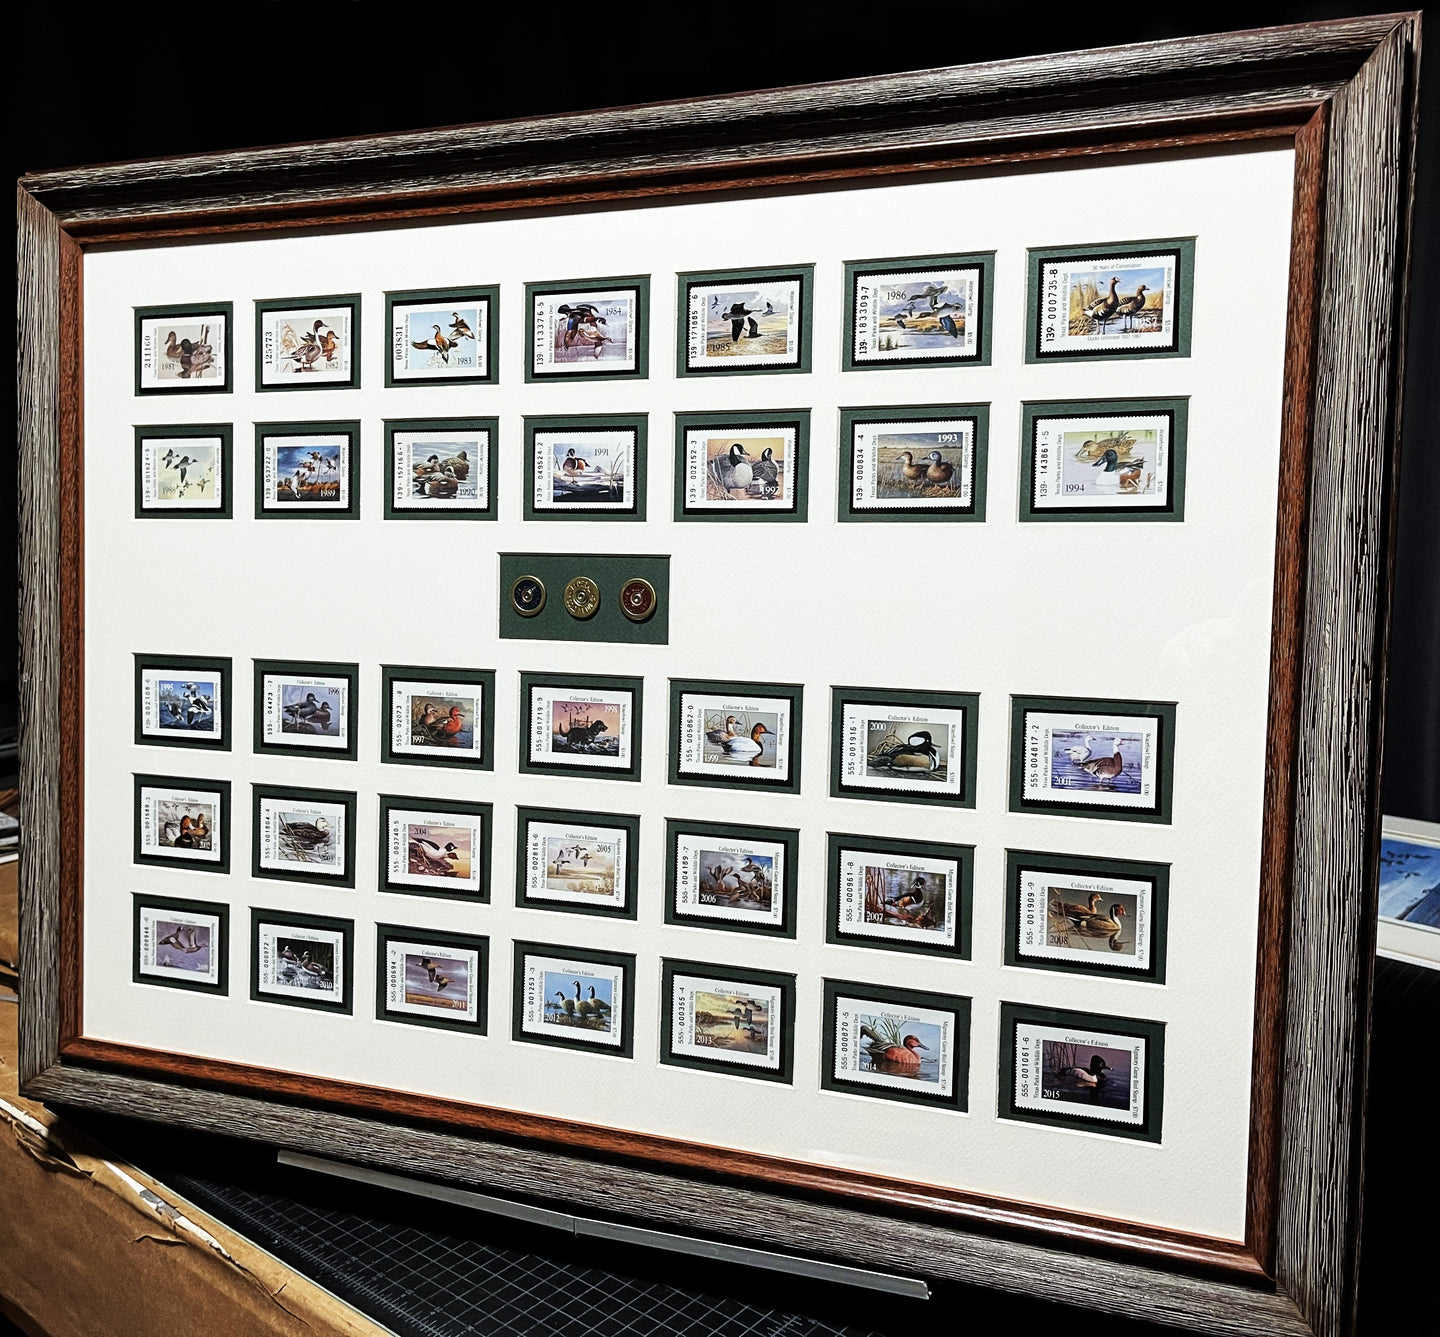 Texas Waterfowl Duck Stamps Complete Set 1981 to 2015 With Shotshell Shadow Box - Brand New Custom Sporting Frame